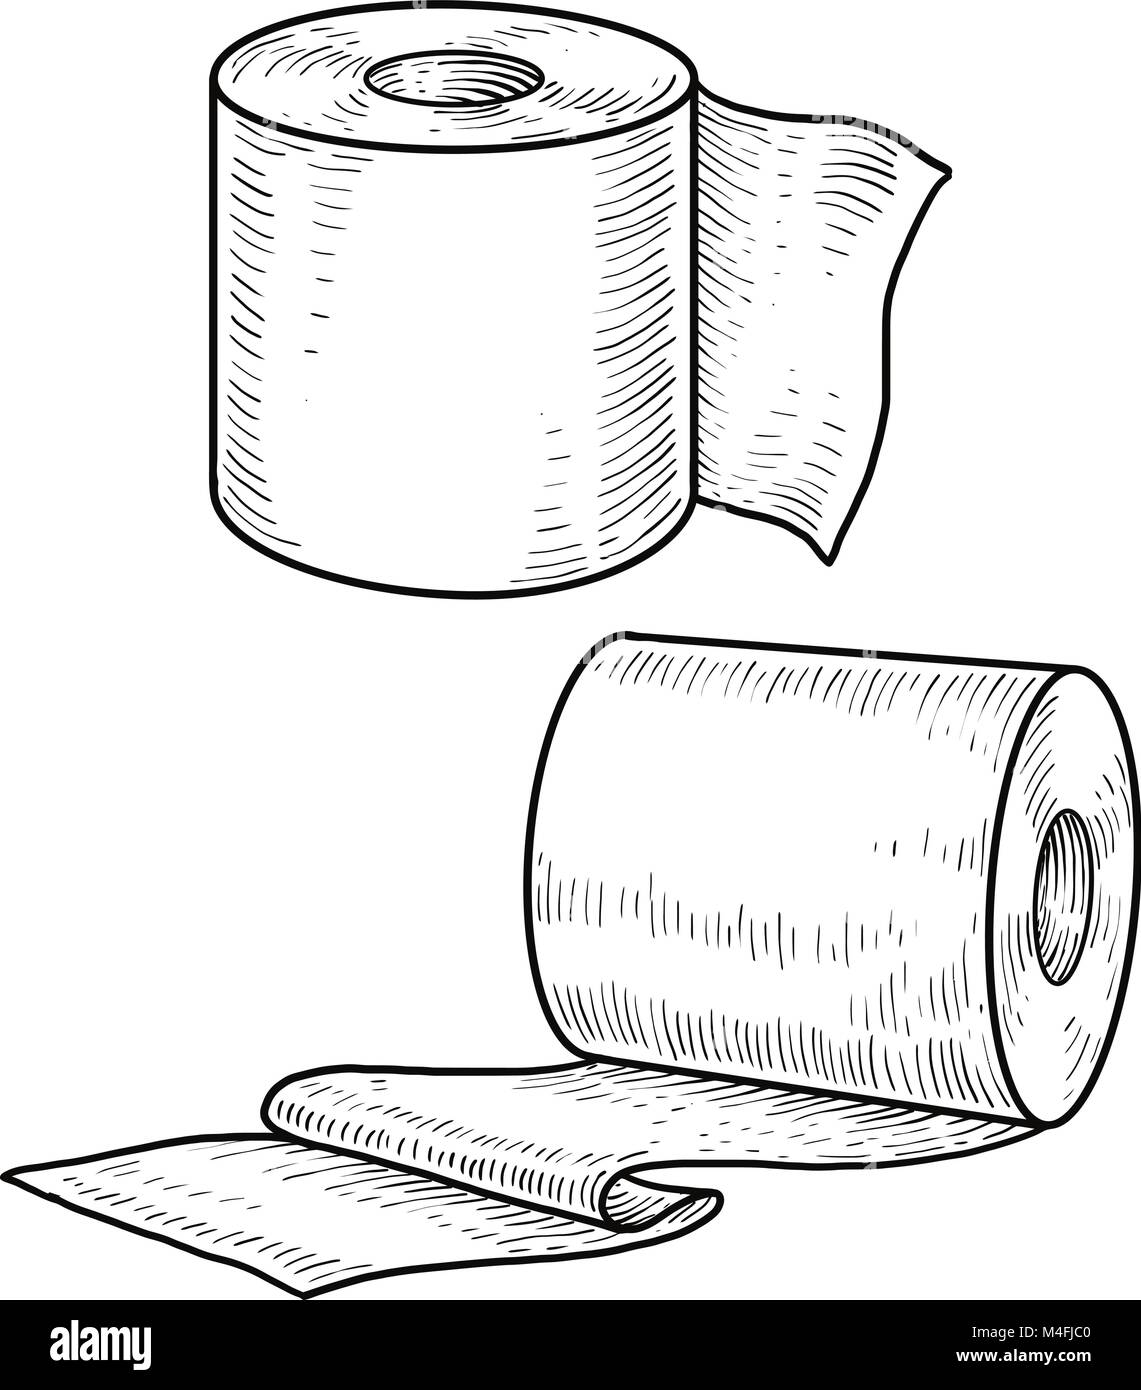 Toilet paper illustration, drawing, engraving, ink, line art, vector Stock Vector